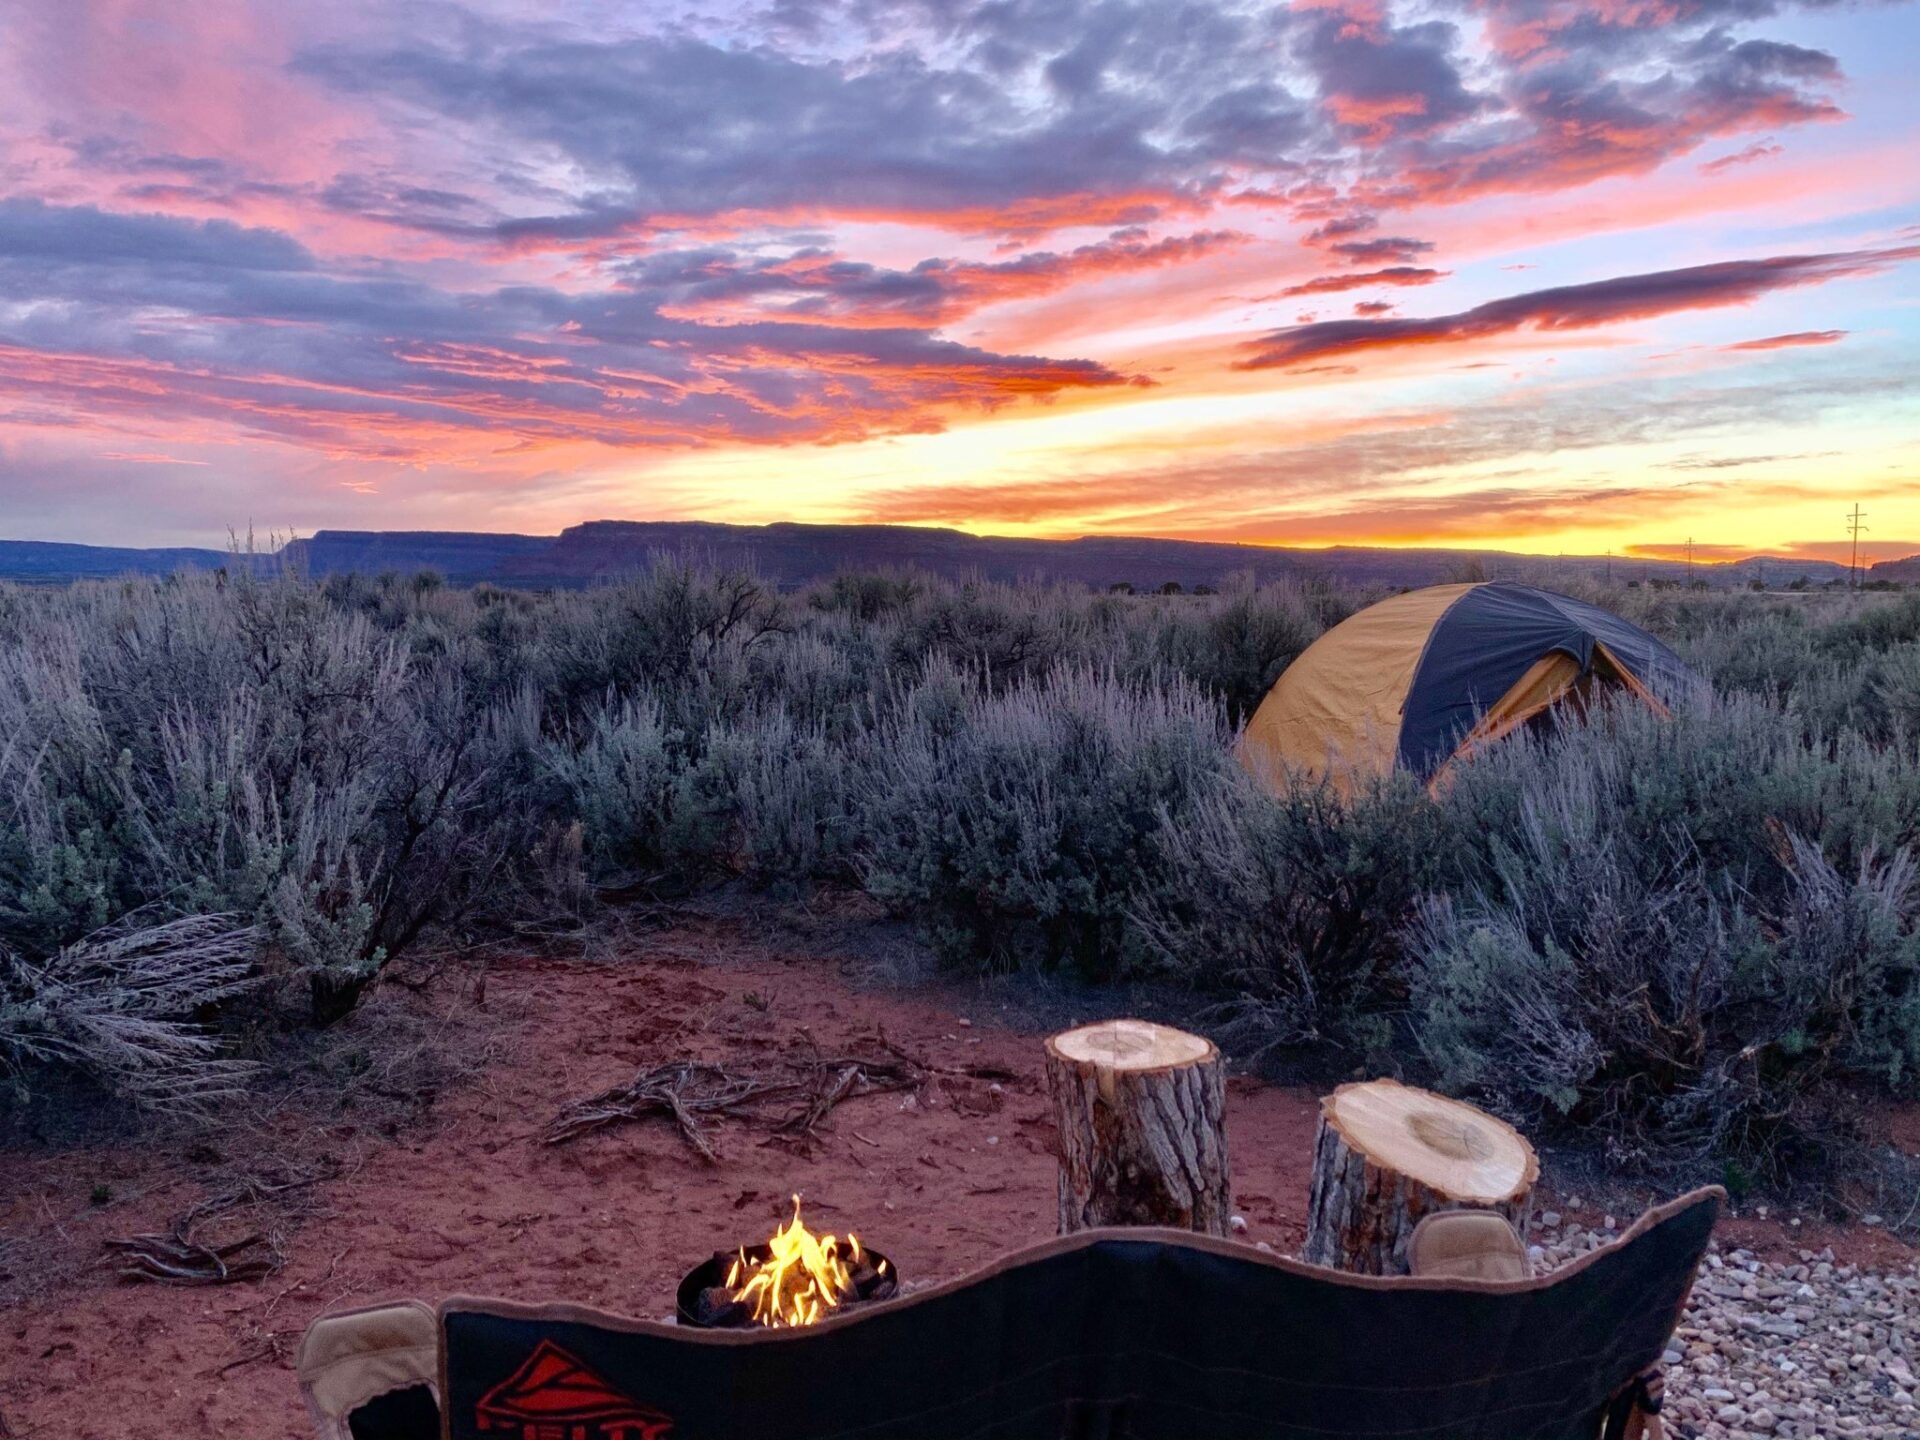 Campendium’s 15 Most Popular Bookable Campgrounds in 2022